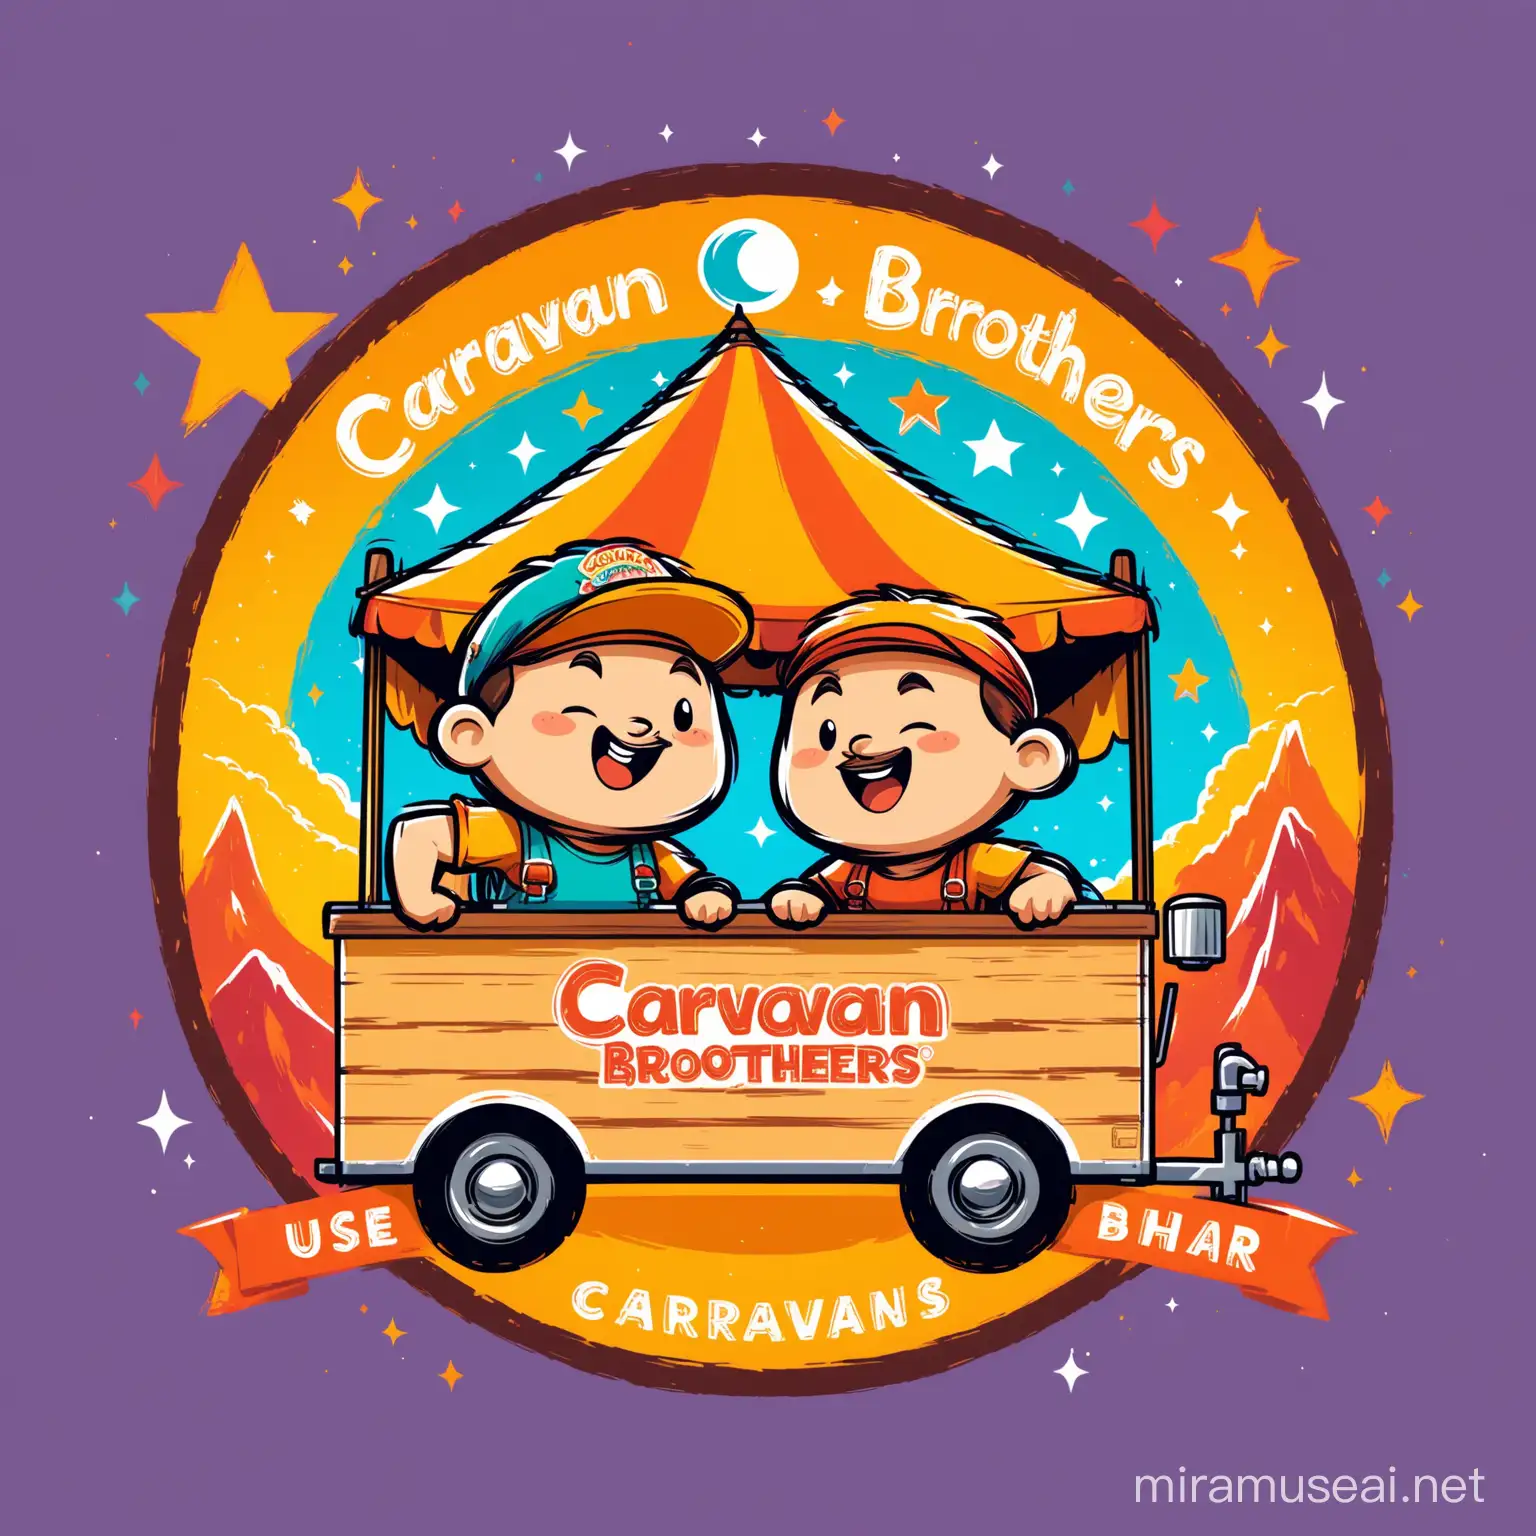 Create a logo with two cartoon characters representing the two brothers inside a trailer. Use bright colors and playful details to capture the audience's attention and communicate the theme of the adventure. In the logo put the word "Caravan Brothers"